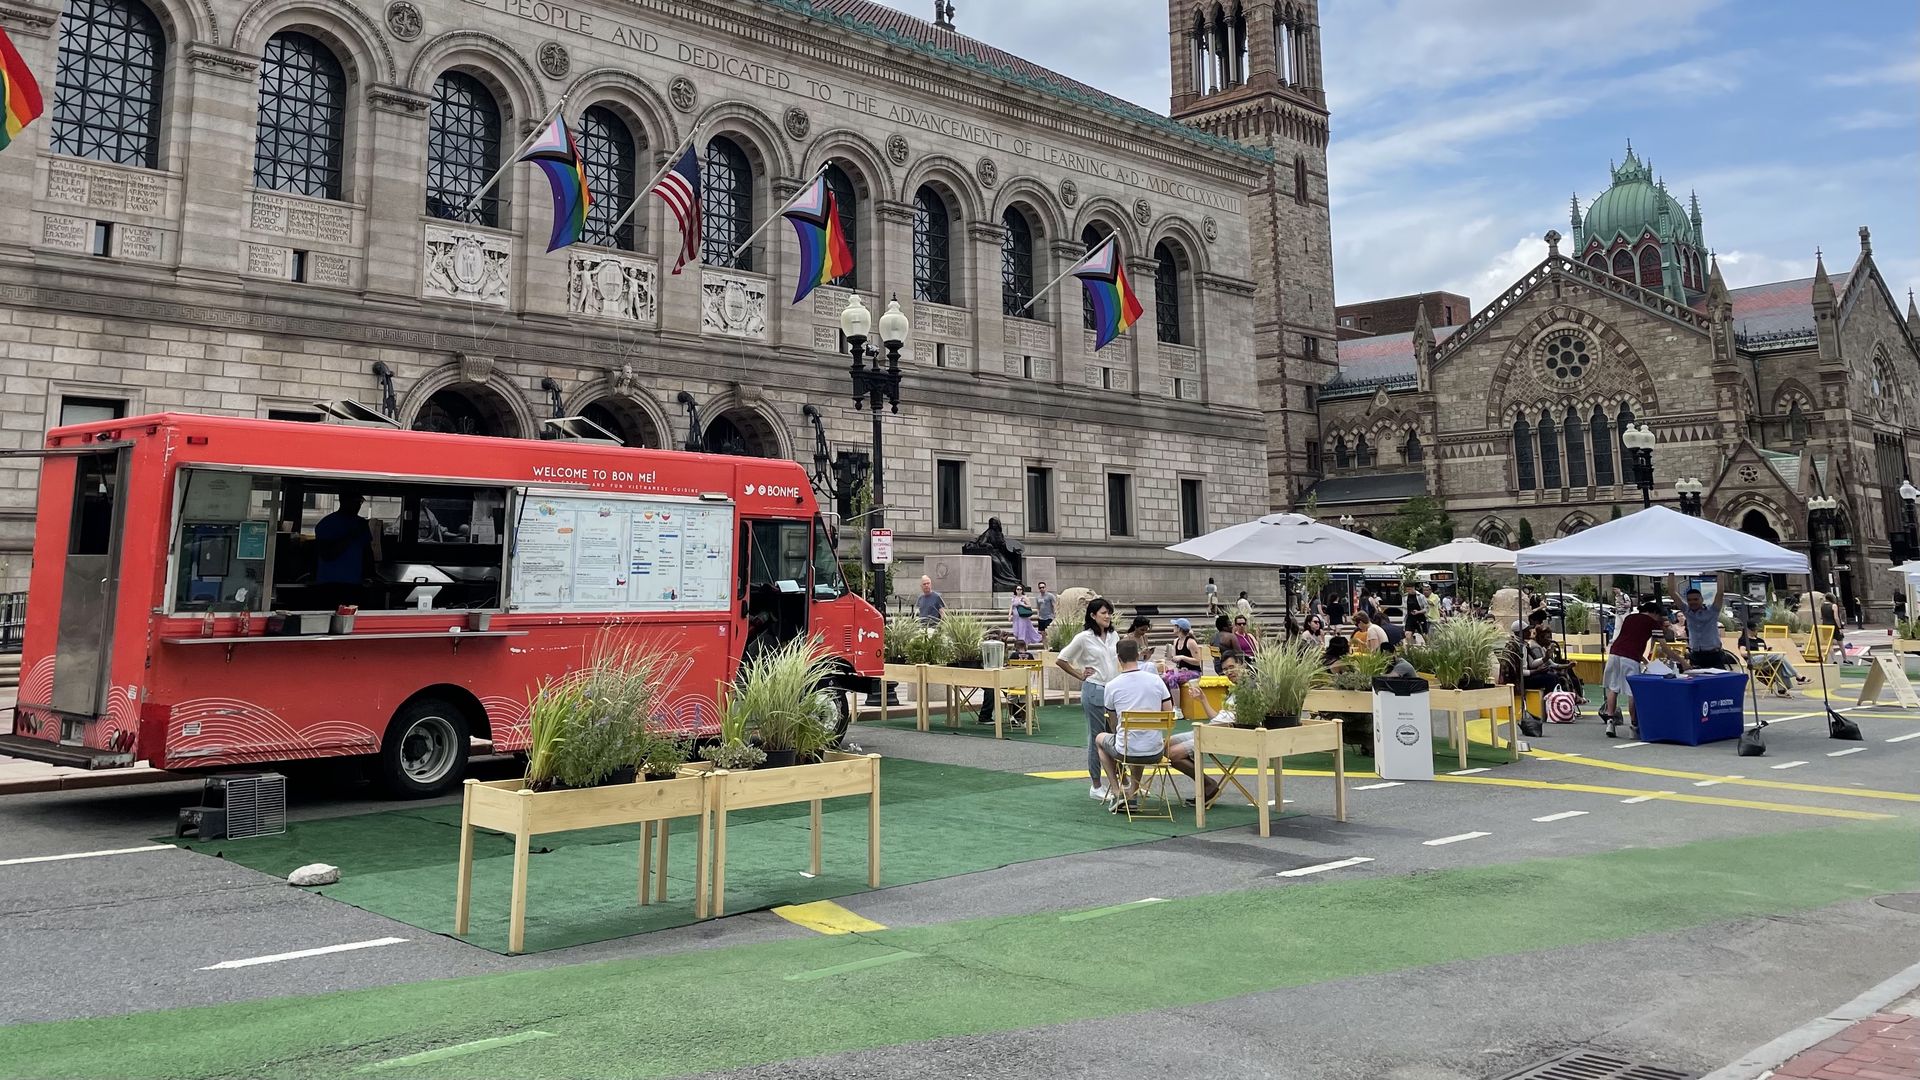 A red food truck is stationed on a closed-off section of Dartmouth Street in front of Boston Public Library. Nearby are chairs and benches.